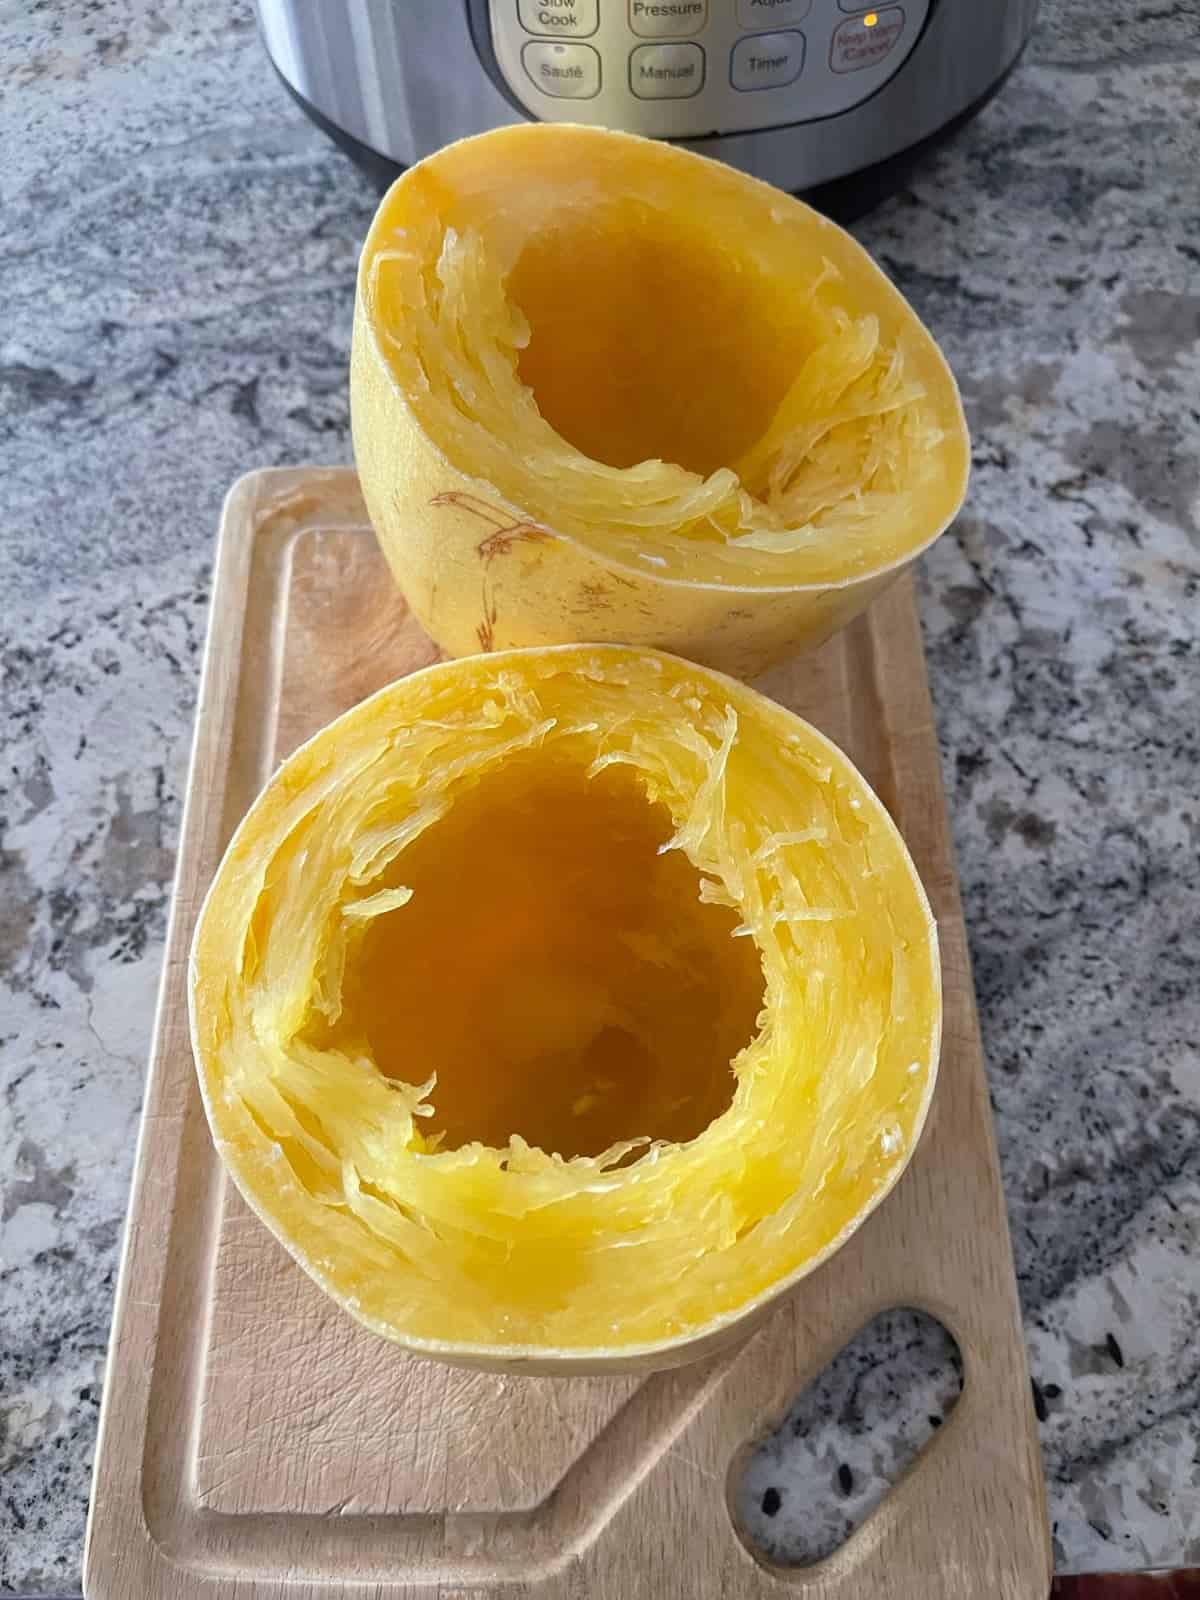 Fresh cooked spaghetti squash halves on wood cutting board with InstantPot in background.